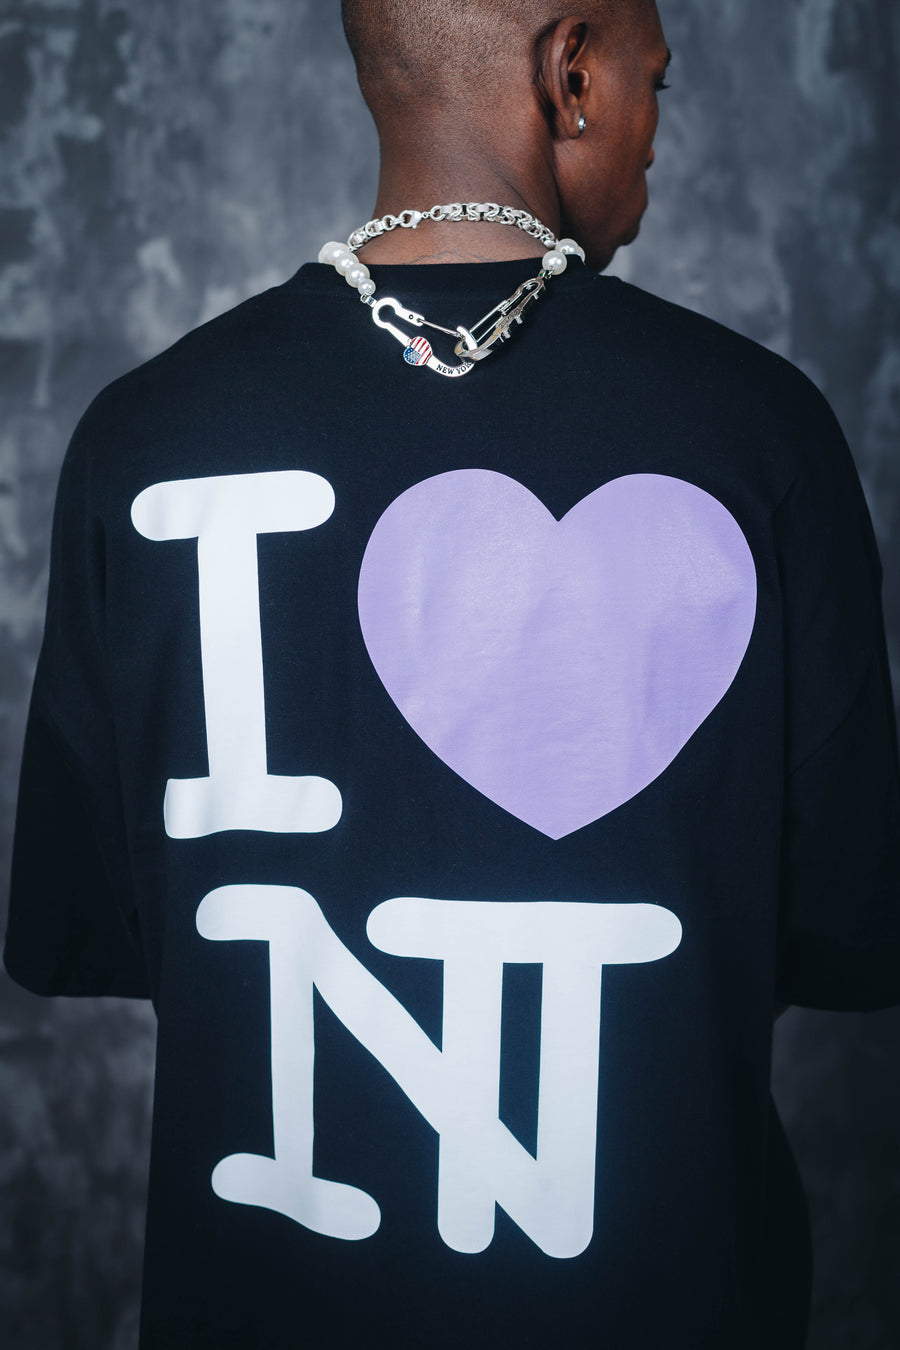 Le T-shirt I LOVE NT - GUNTHER